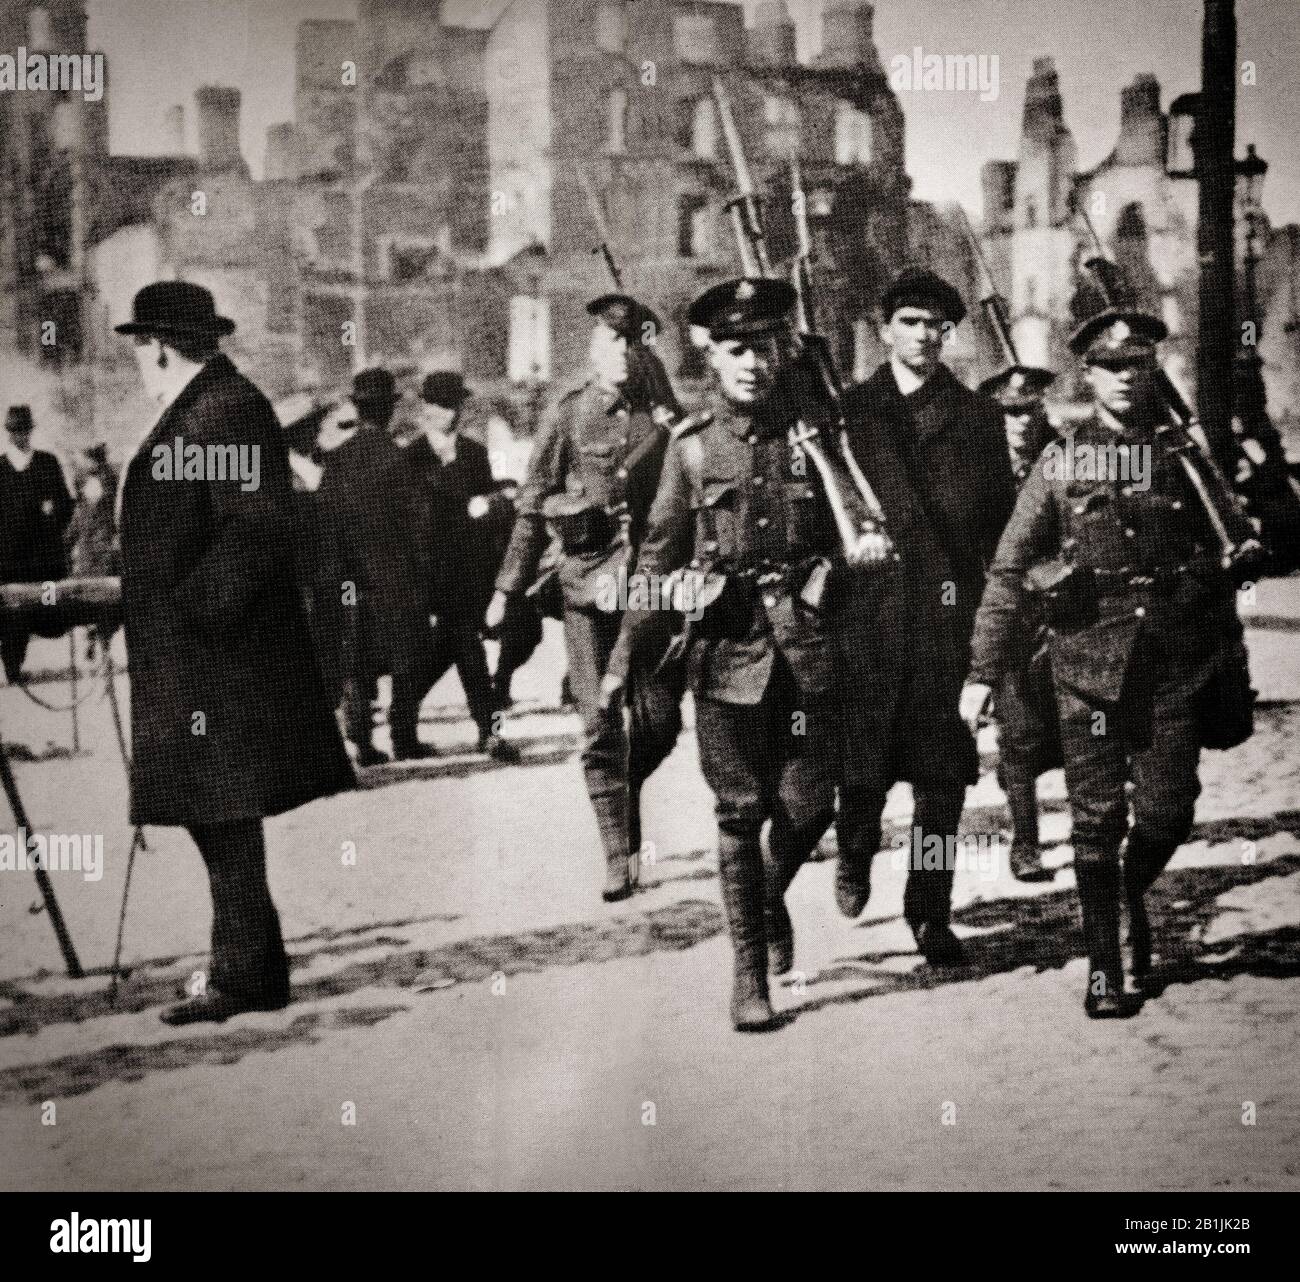 An Irish nationalist is led under escort by British oldiers to Dublin Castle following the Easter Rising of 1916, an armed insurrection in Ireland during Easter Week, April 1916. It was launched by Irish republicans to end British rule in Ireland and establish an independent Irish Republic while the United Kingdom was fighting the First World War. It was the first armed action of the Irish revolutionary period. Sixteen of the Rising's leaders were executed in May 1916, but subsequent  political developments ultimately contributed to Irish independence. Stock Photo